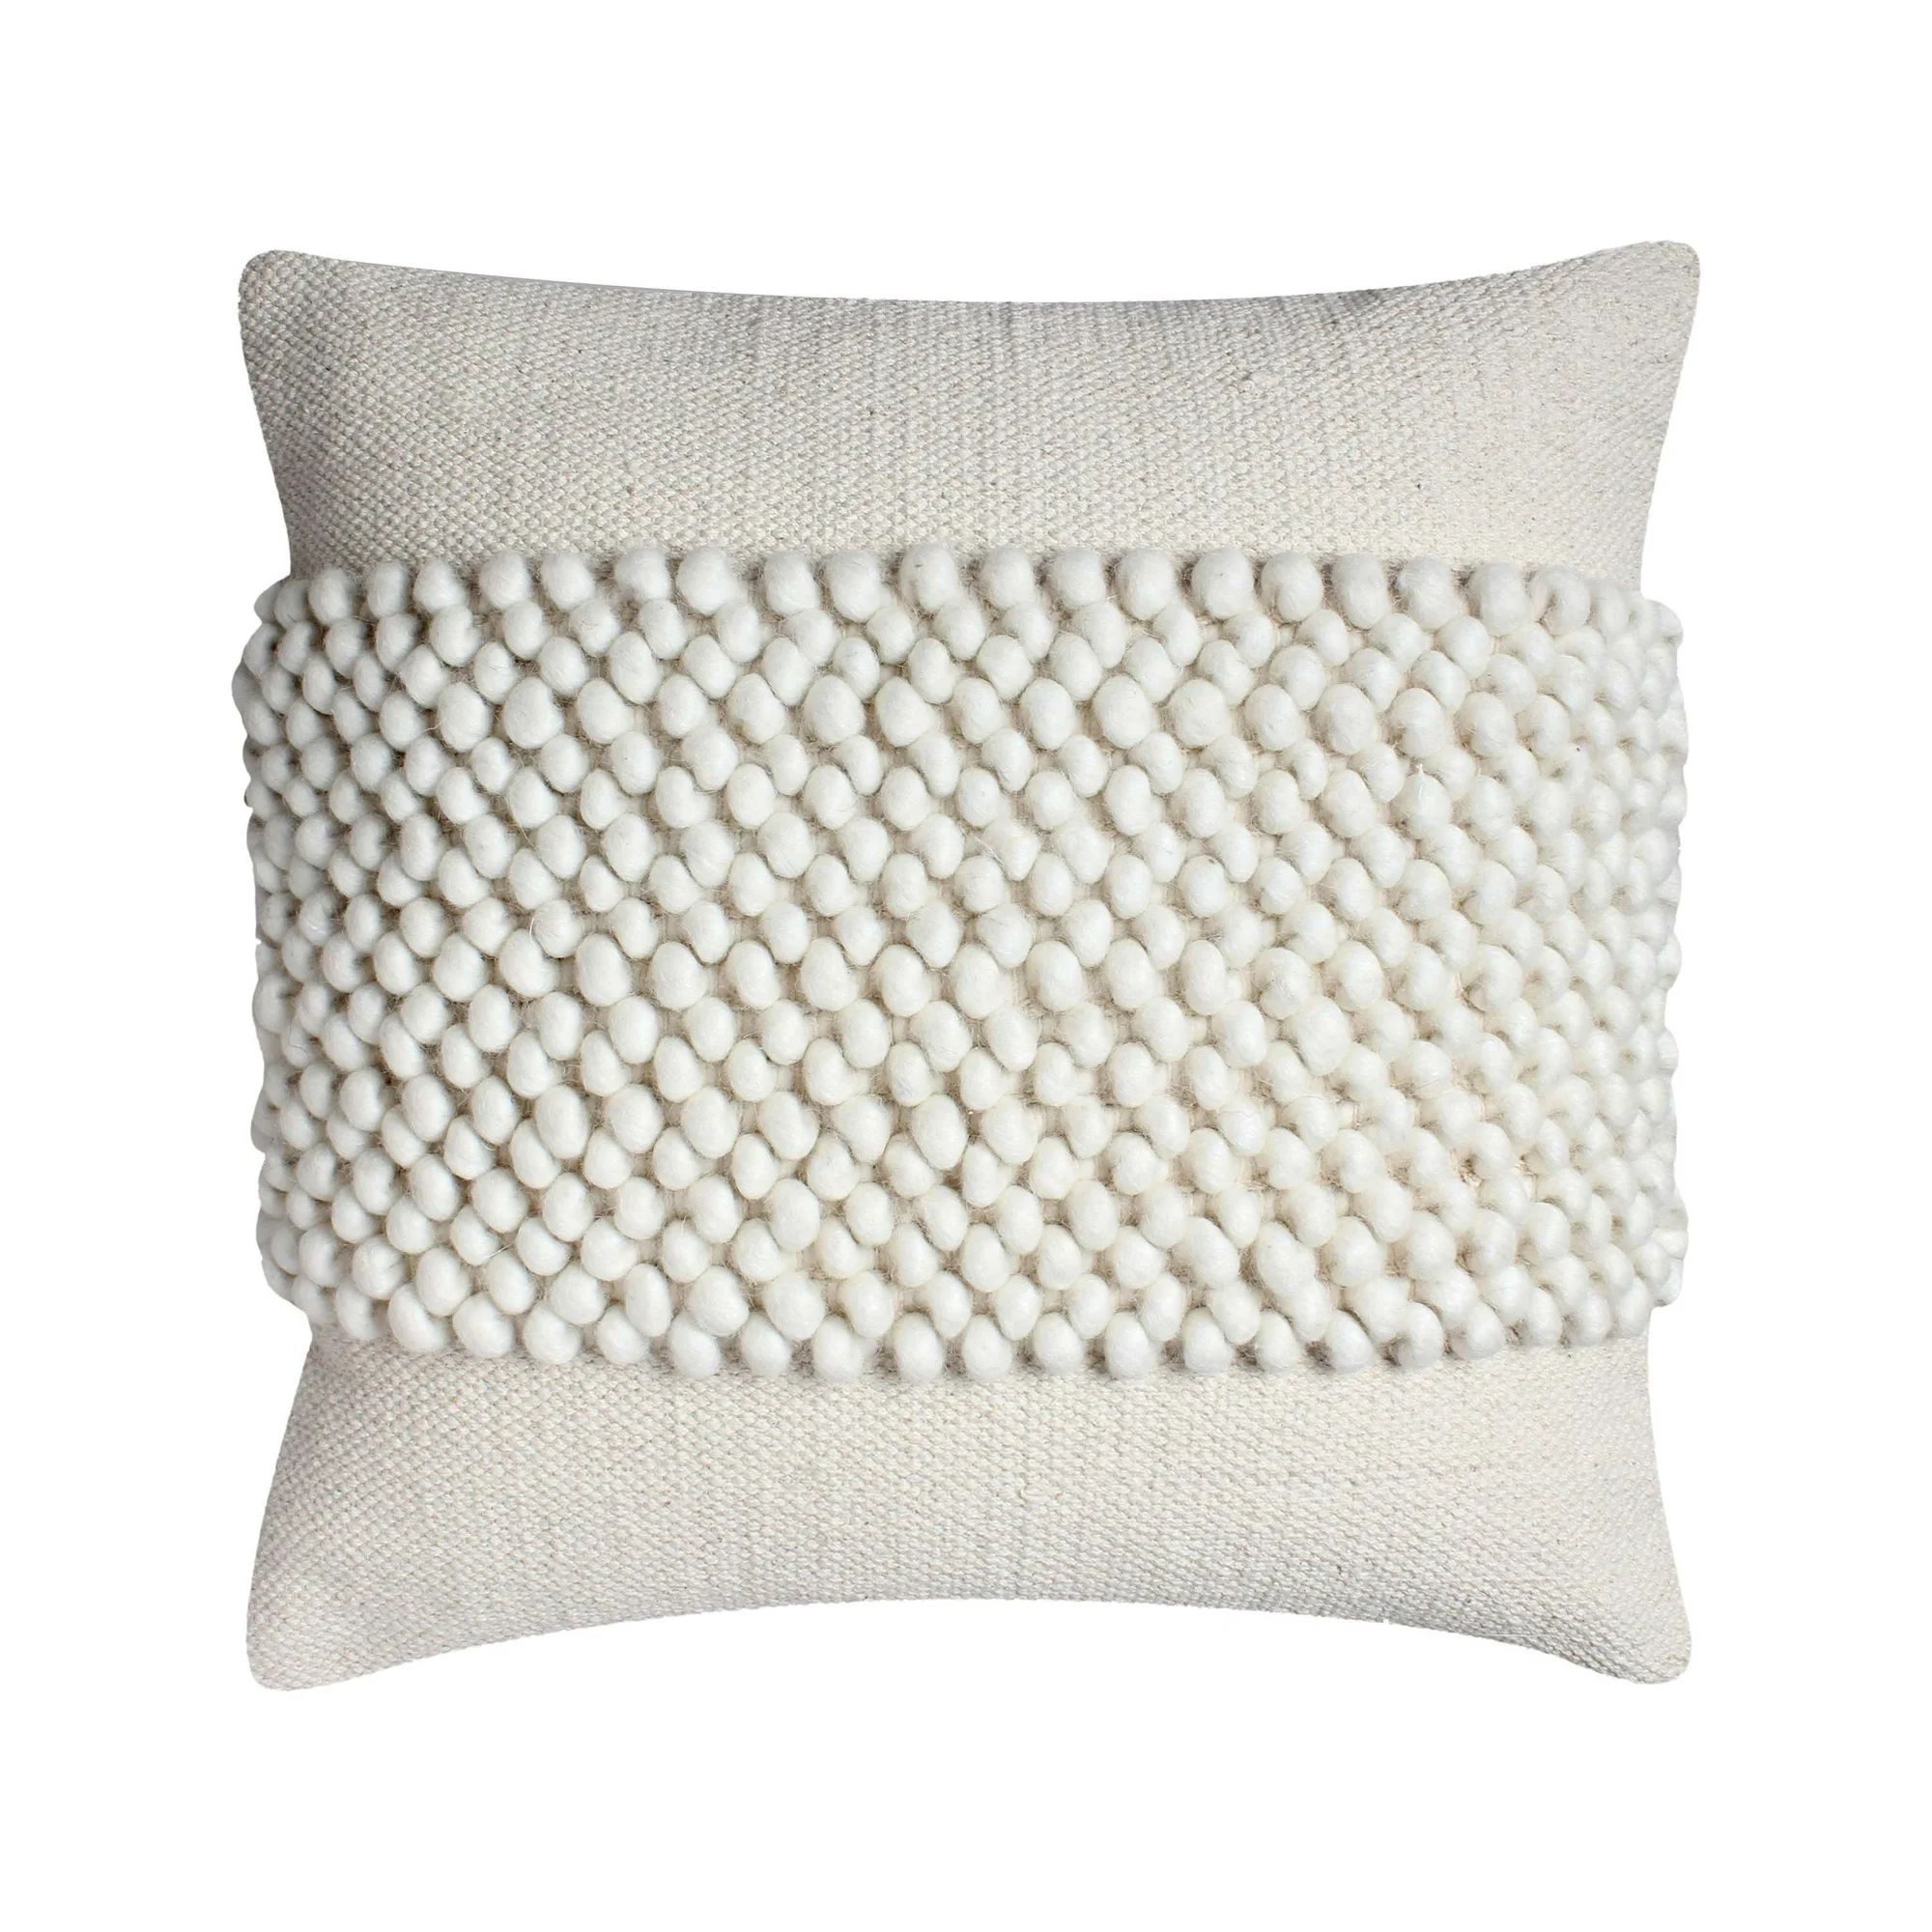 20 x 20 Square Cotton Accent Throw Pillow, Textured Dotted Fabric Details, White | Walmart (US)